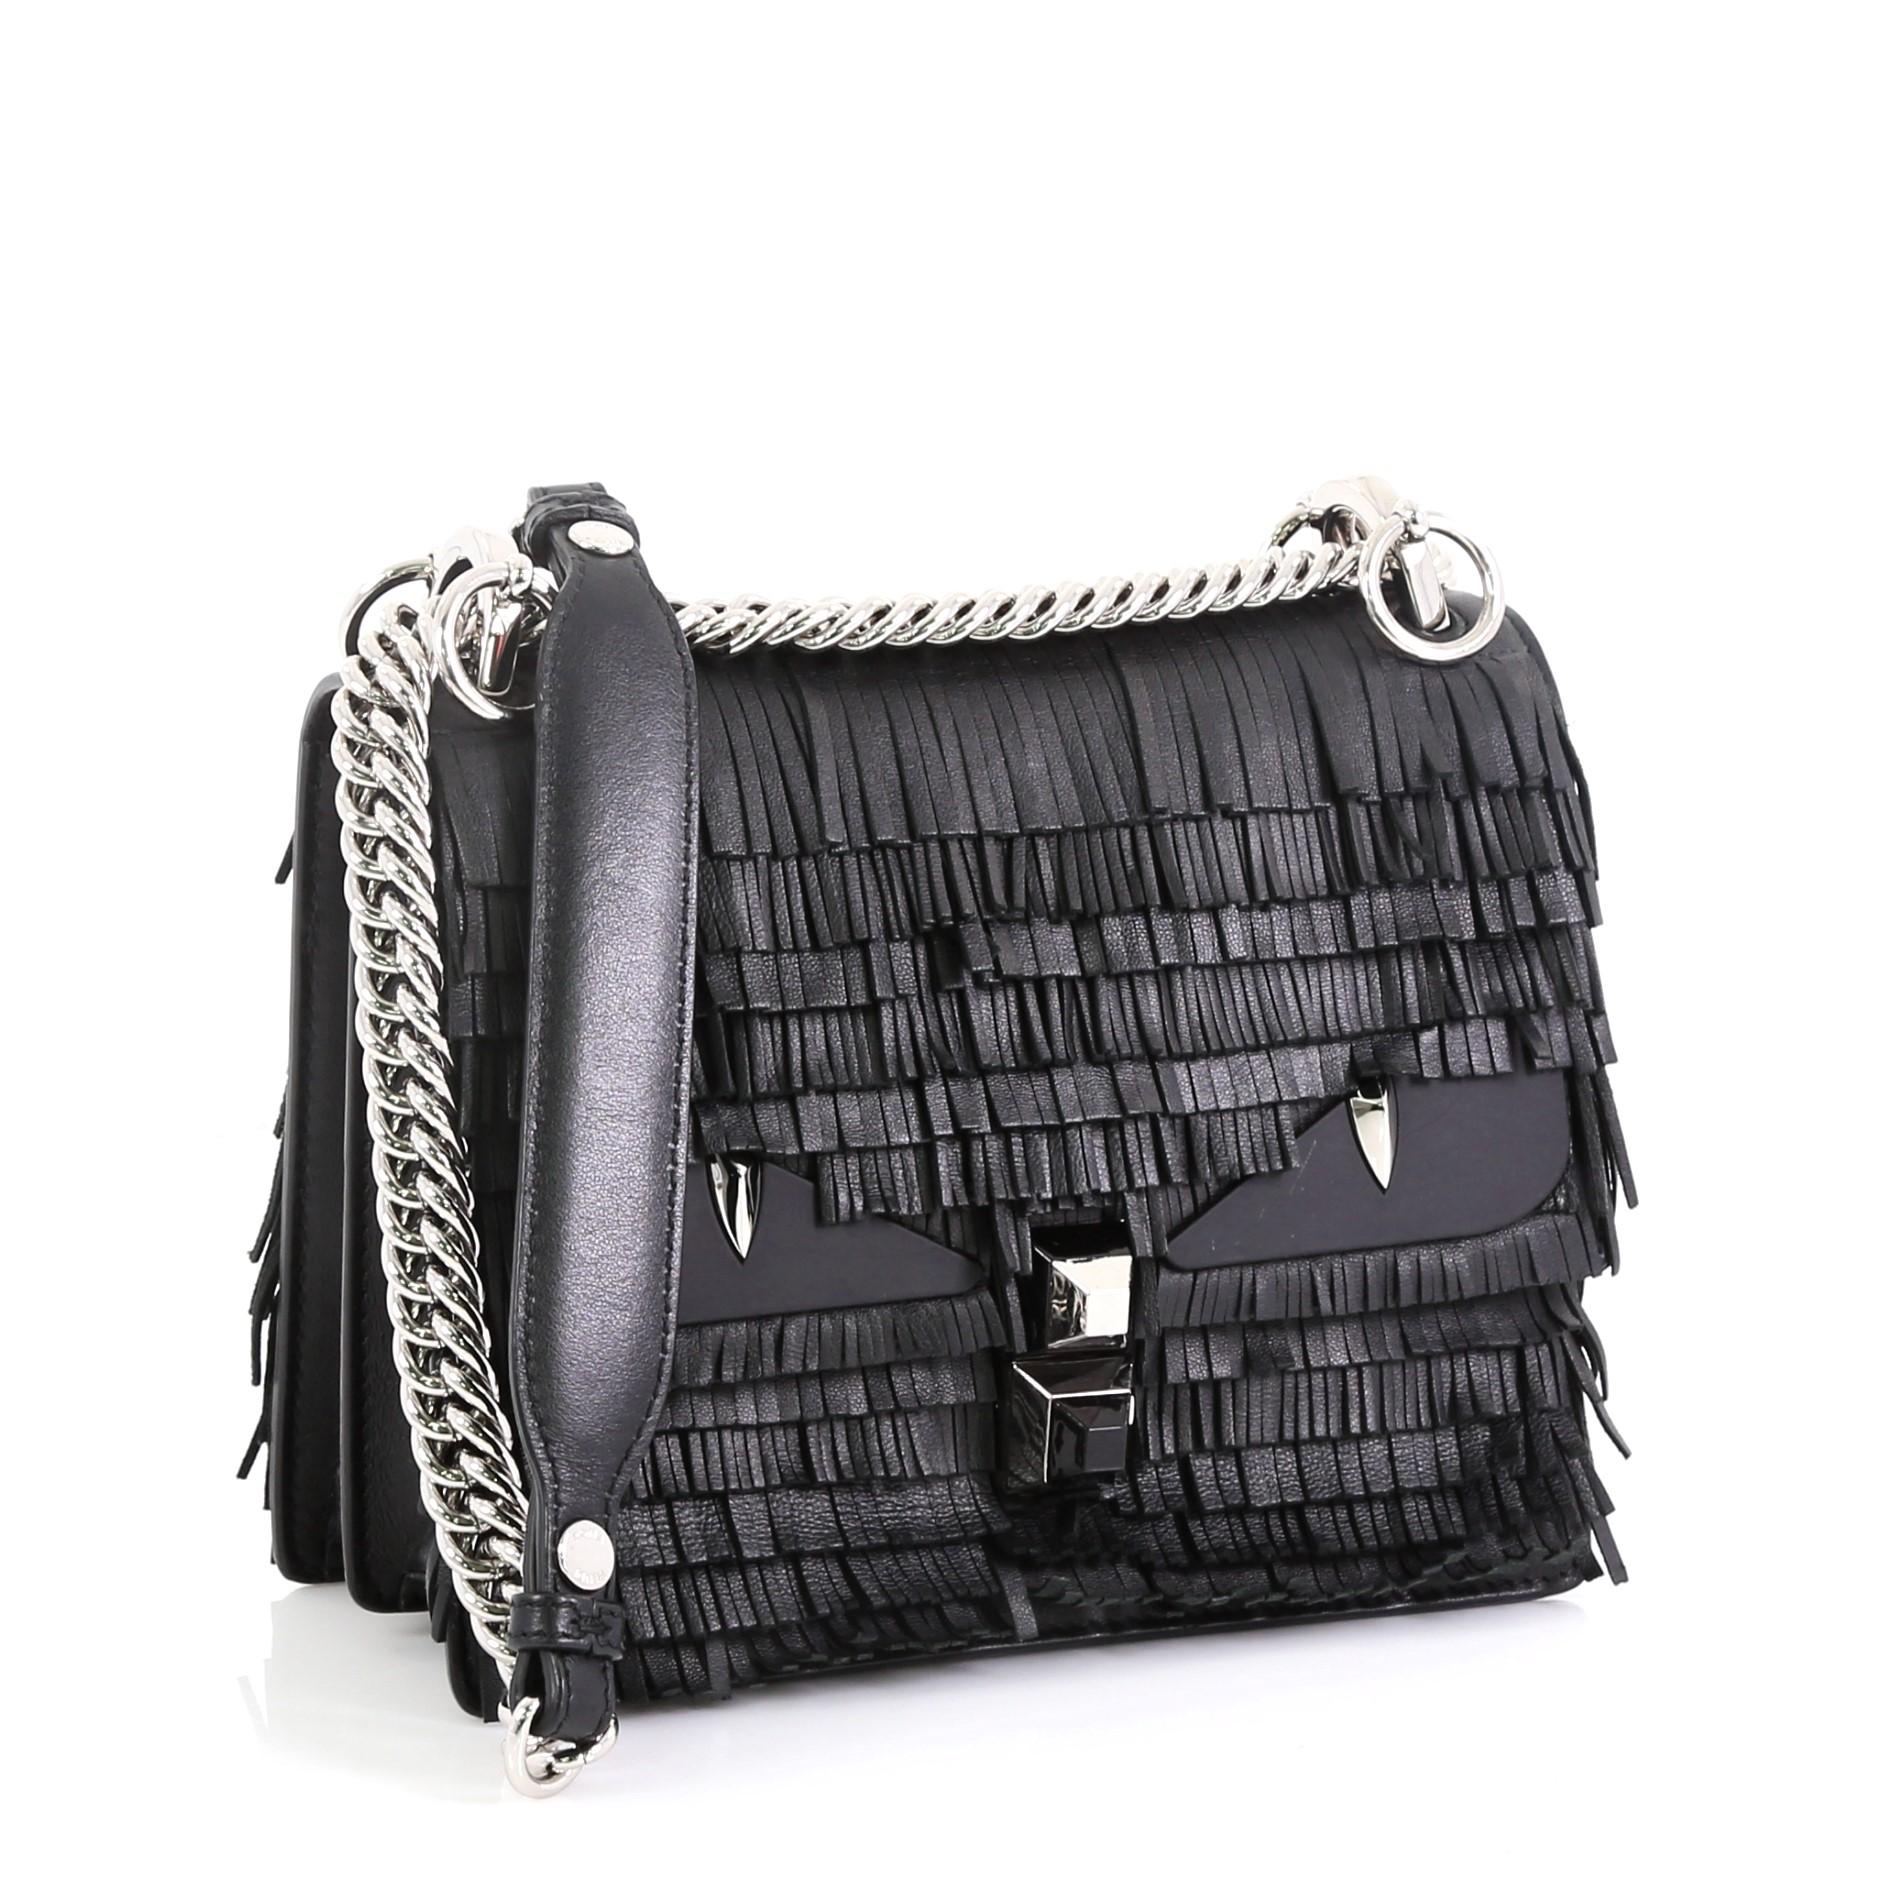 This Fendi Monster Kan I Bag Fringe Leather Small, crafted from black fringe leather, features chain link strap with leather pad, monster eye applique design, and silver-tone hardware. Its plexiglass twist-lock closure opens to a gray microfiber